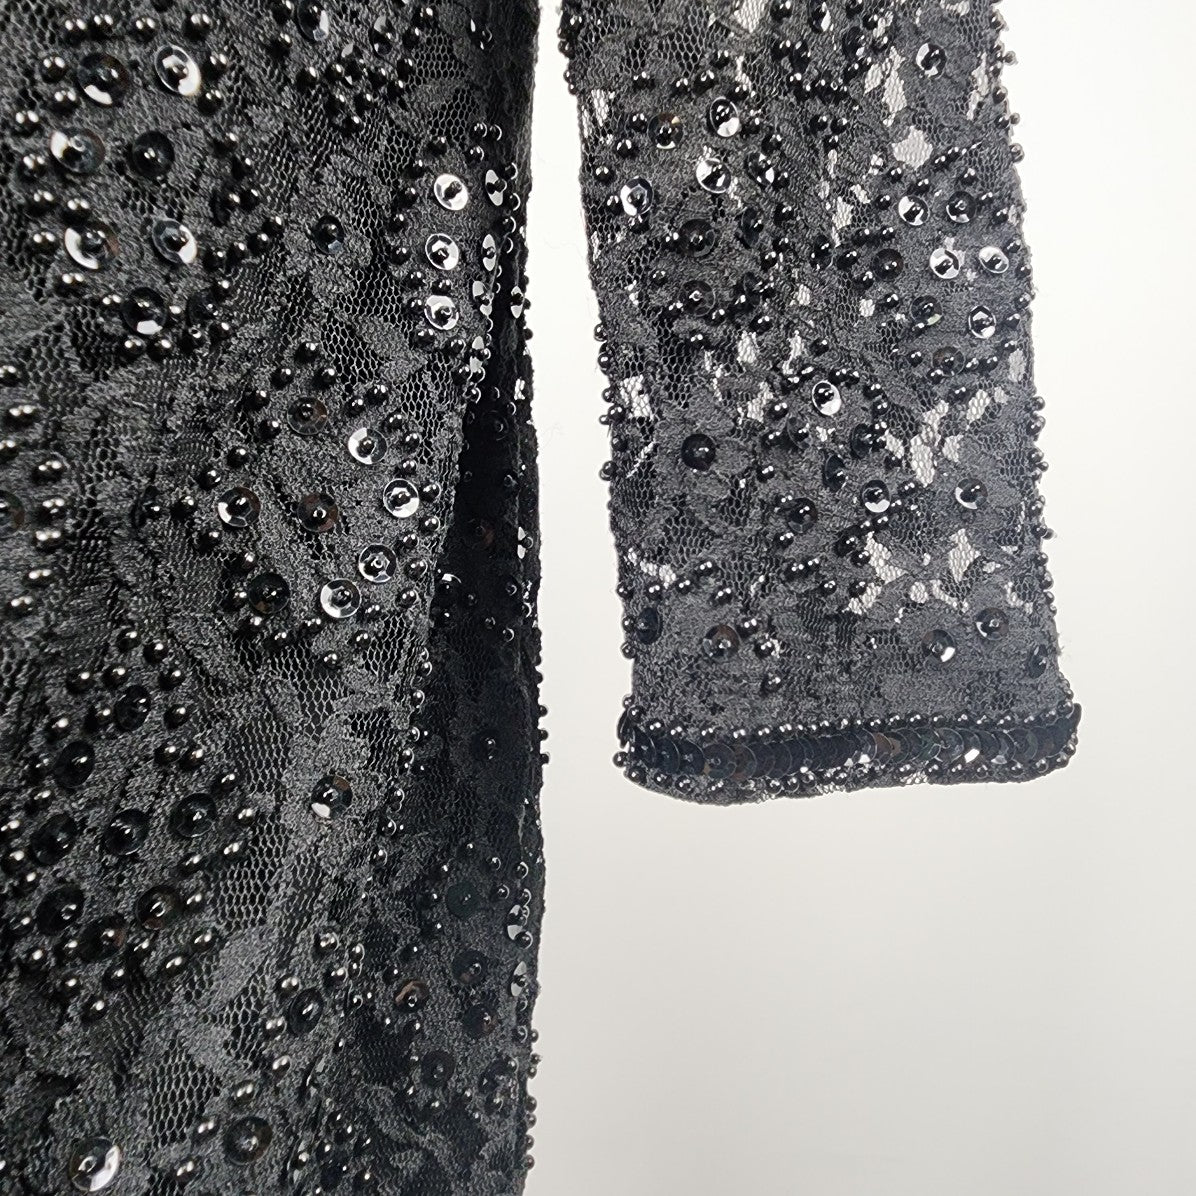 Vintage Black Long Sleeve Beaded Lace Gown Dress Size S